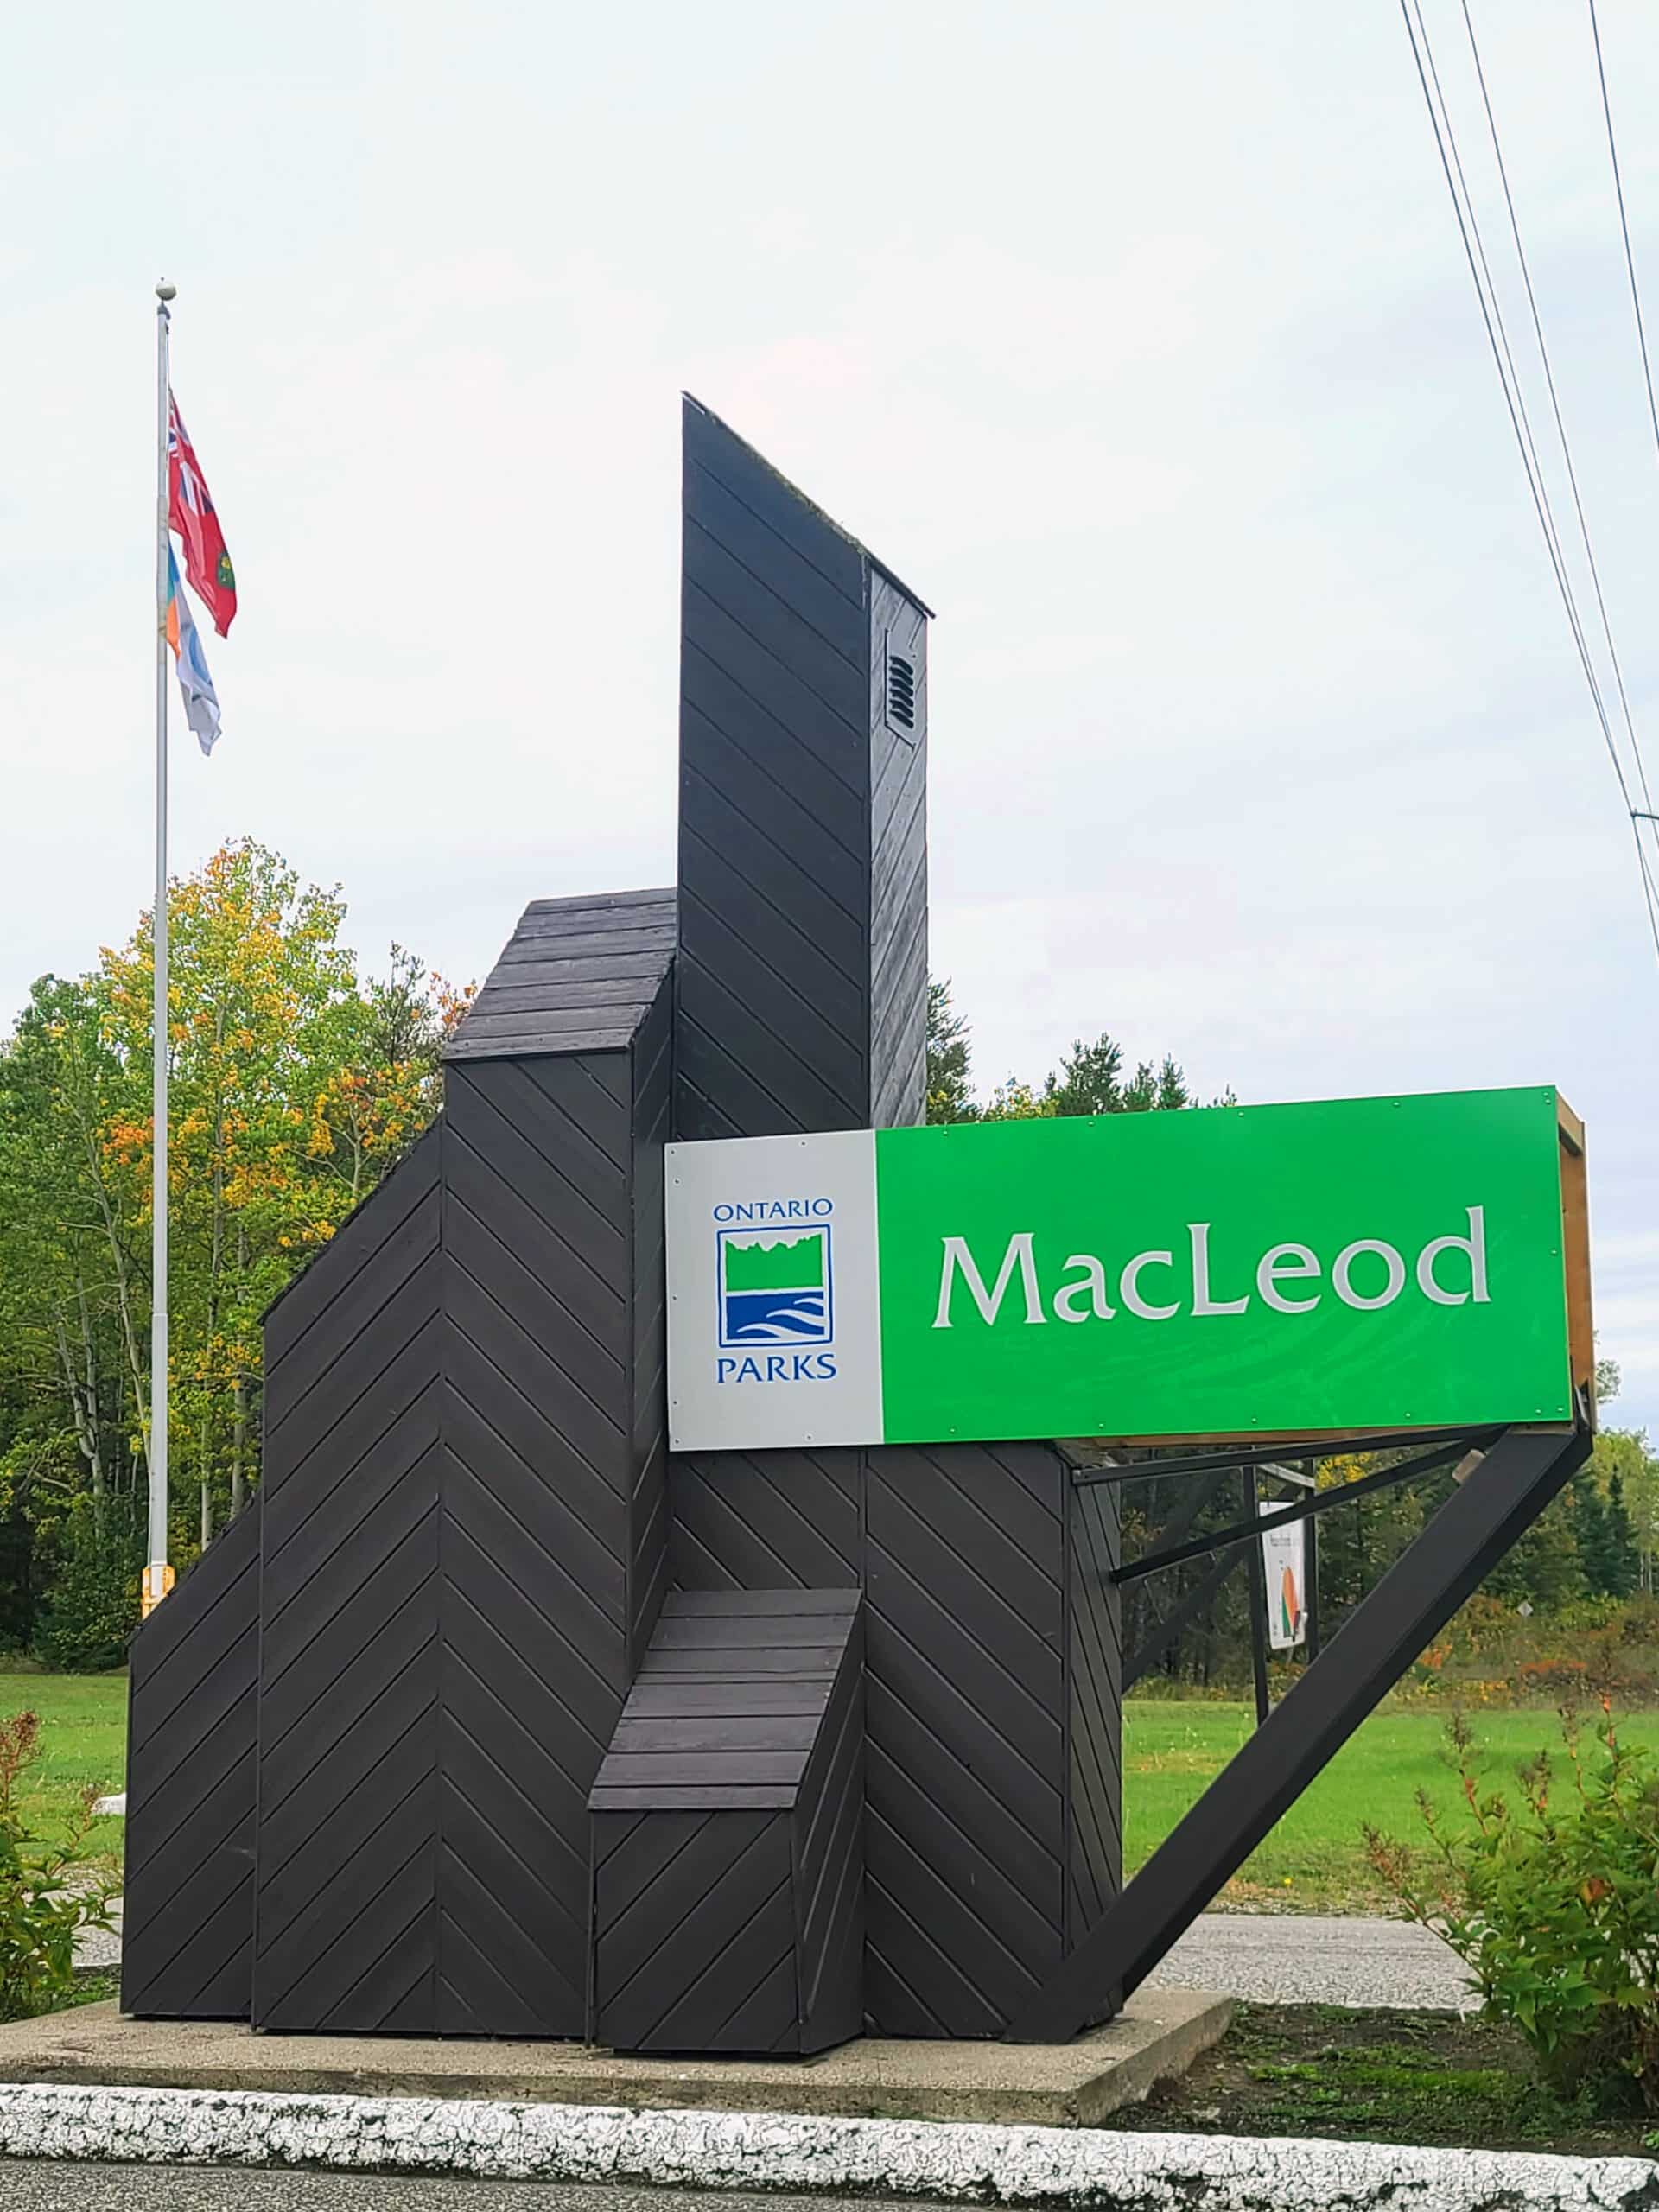 The MacLeod Provincial Park sign at the entry to the park.